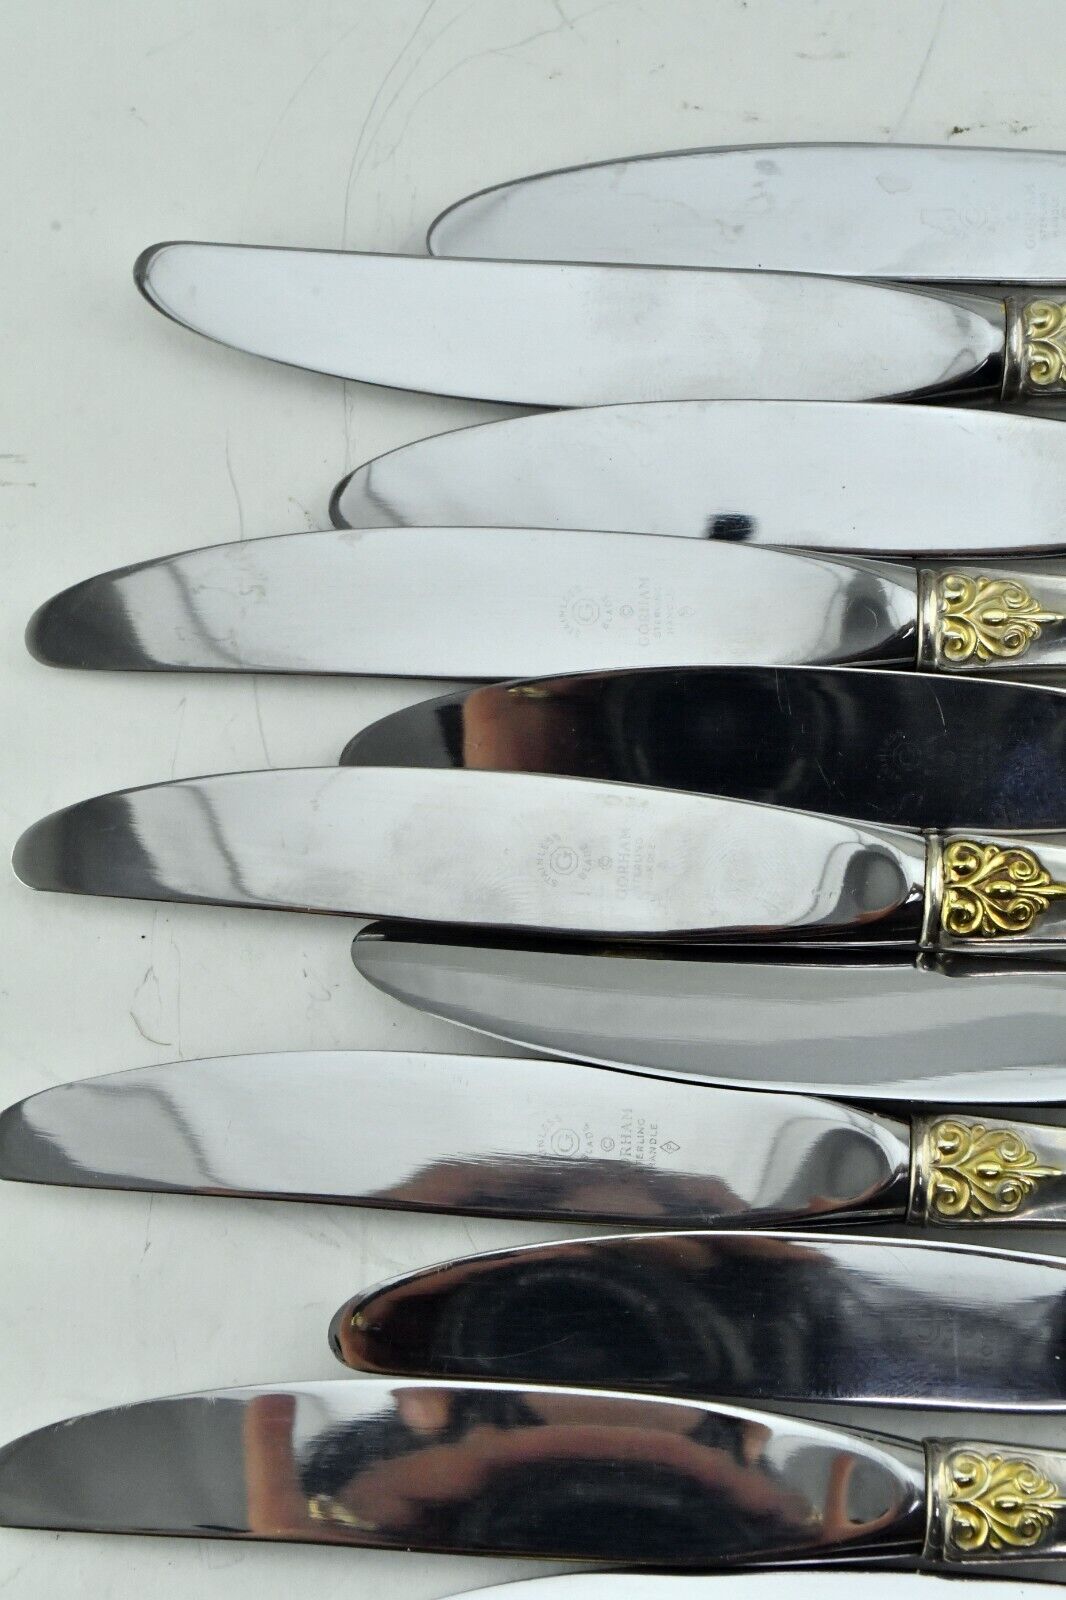 14pc.Hispana-Sovereign "Gold" by Gorham Sterling 9" Hollow Handle Knives Set